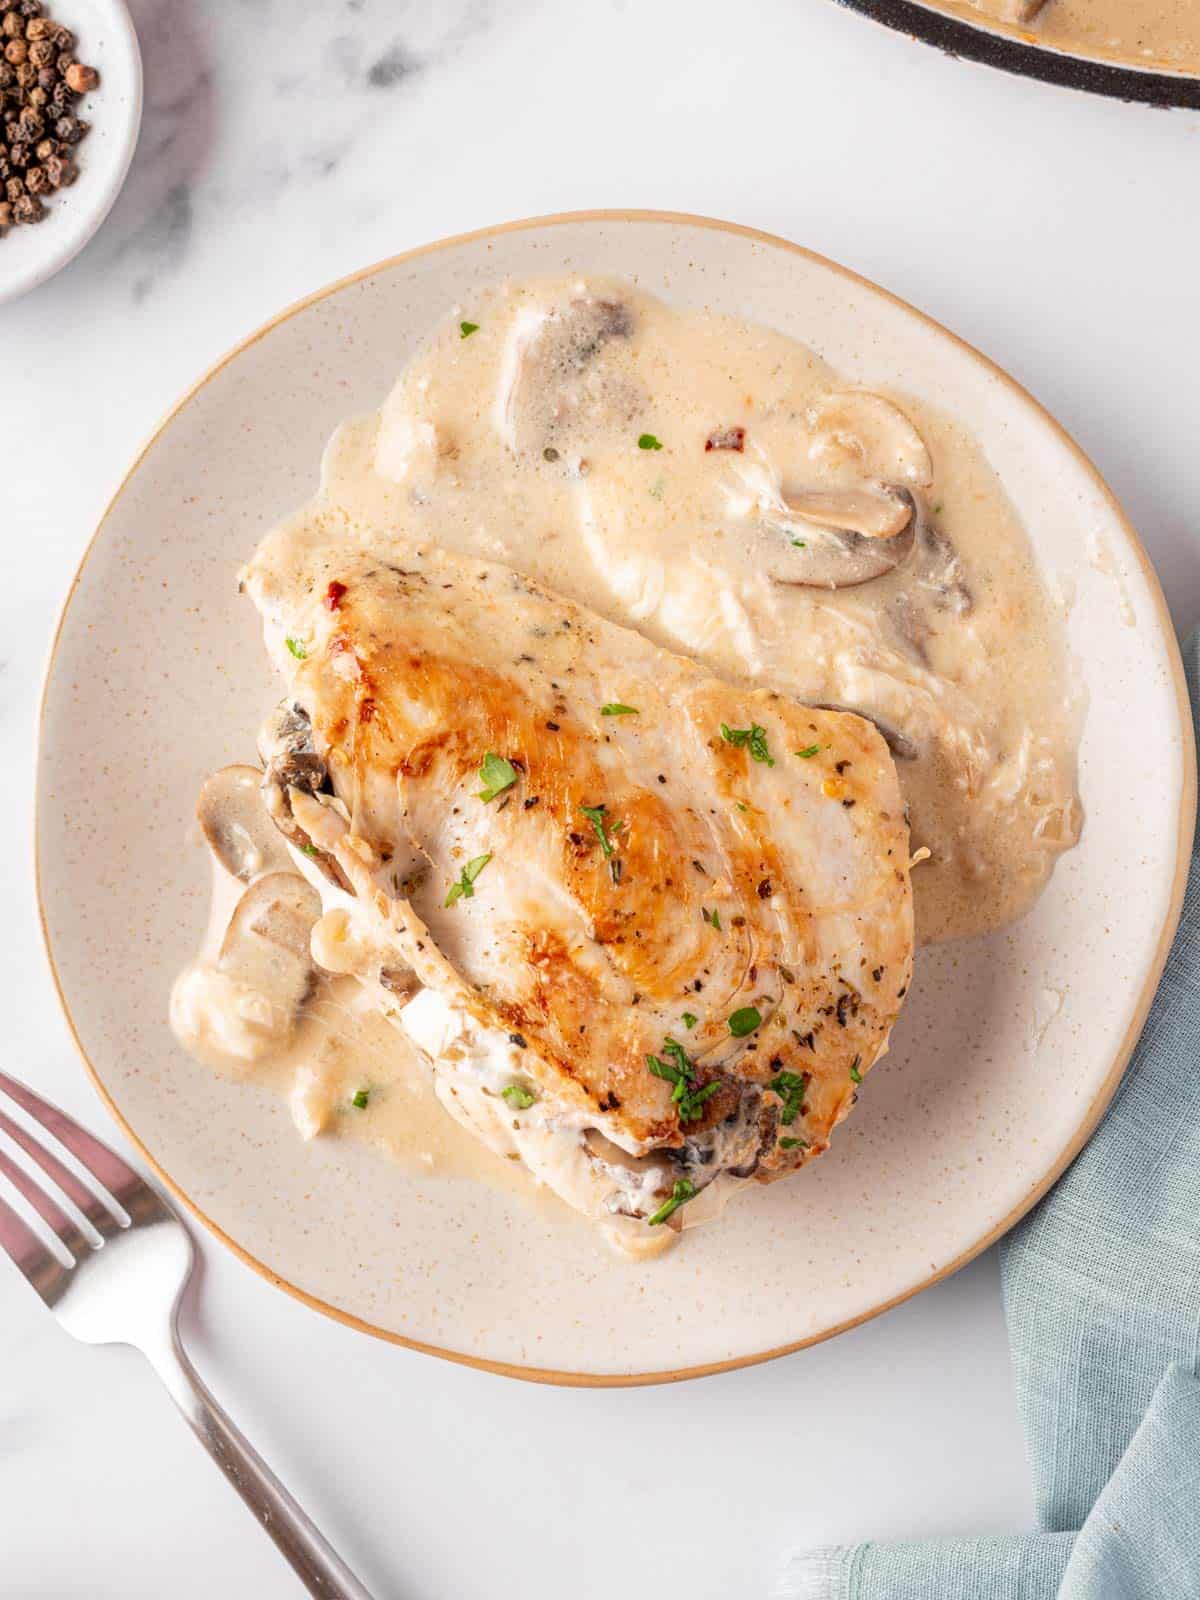 A plate with a mushroom stuffed chicken breast resting on top of the creamy garlic butter sauce. A fork sits to the left.